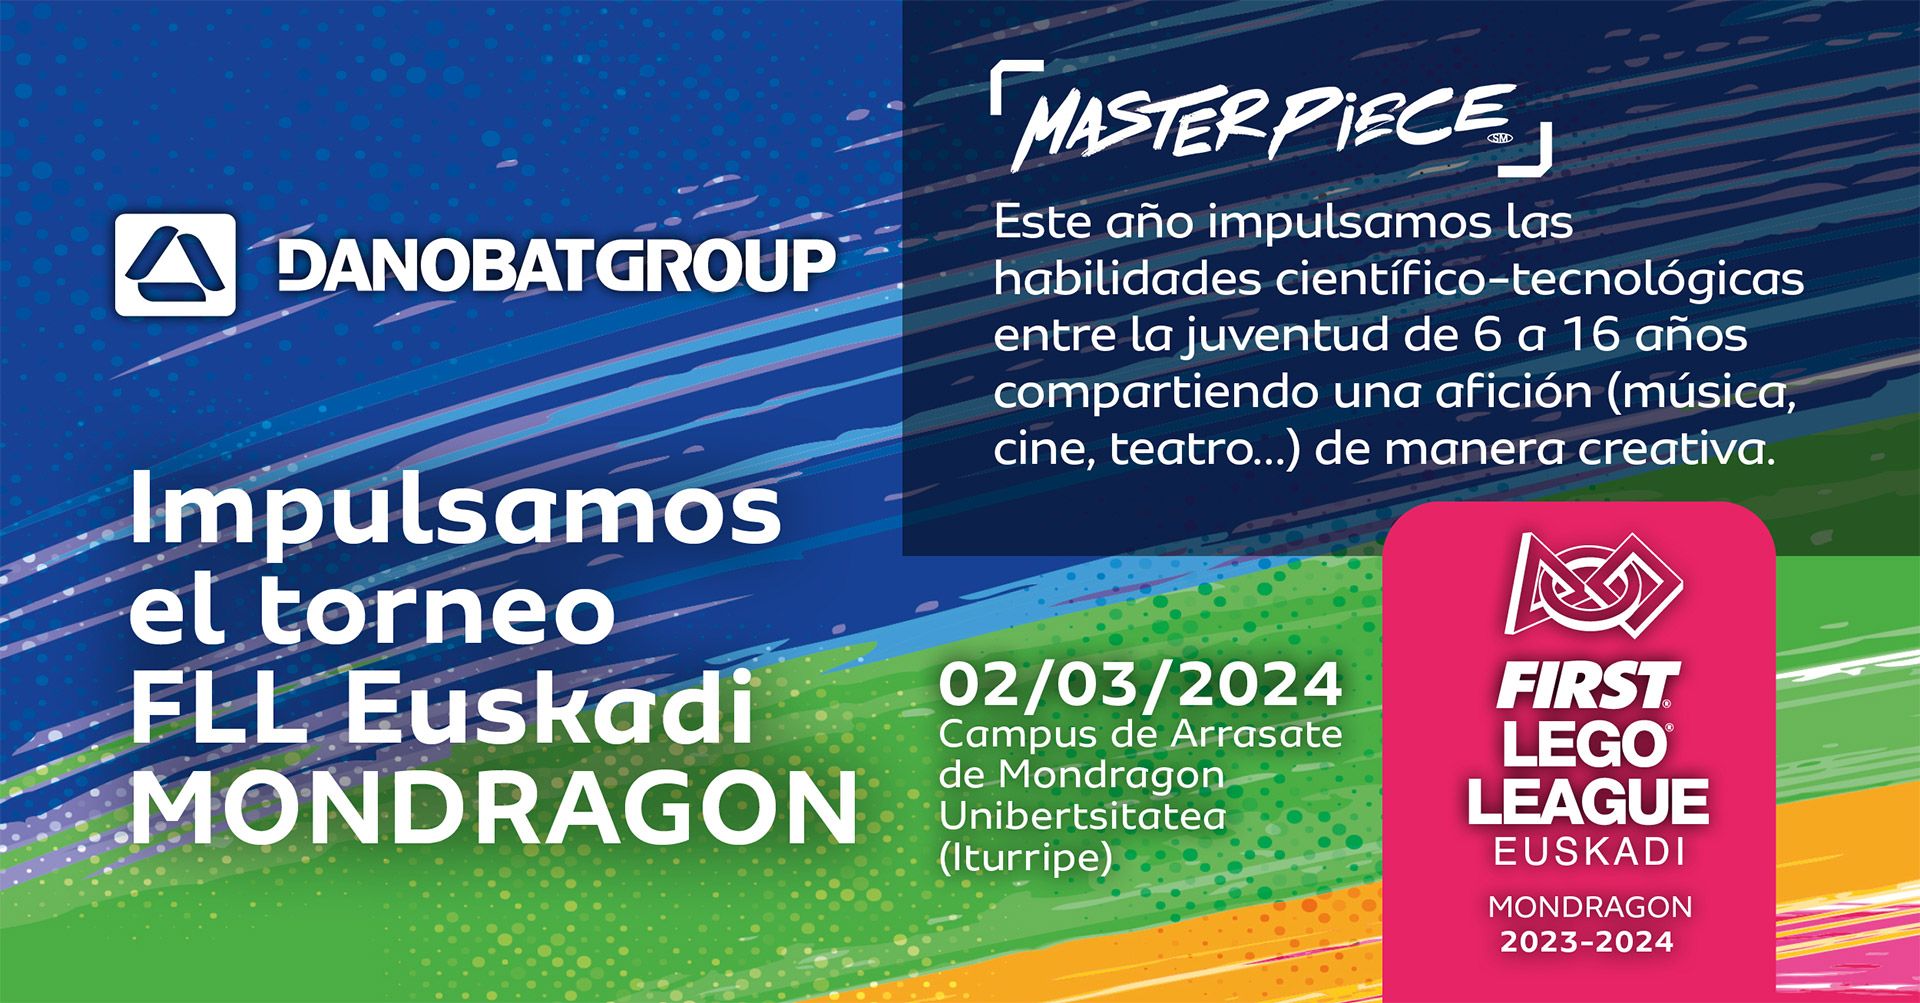 Danobatgroup steps up its commitment to fostering talent in STEAM areas by sponsoring the First Lego League Euskadi-MONDRAGON tournament